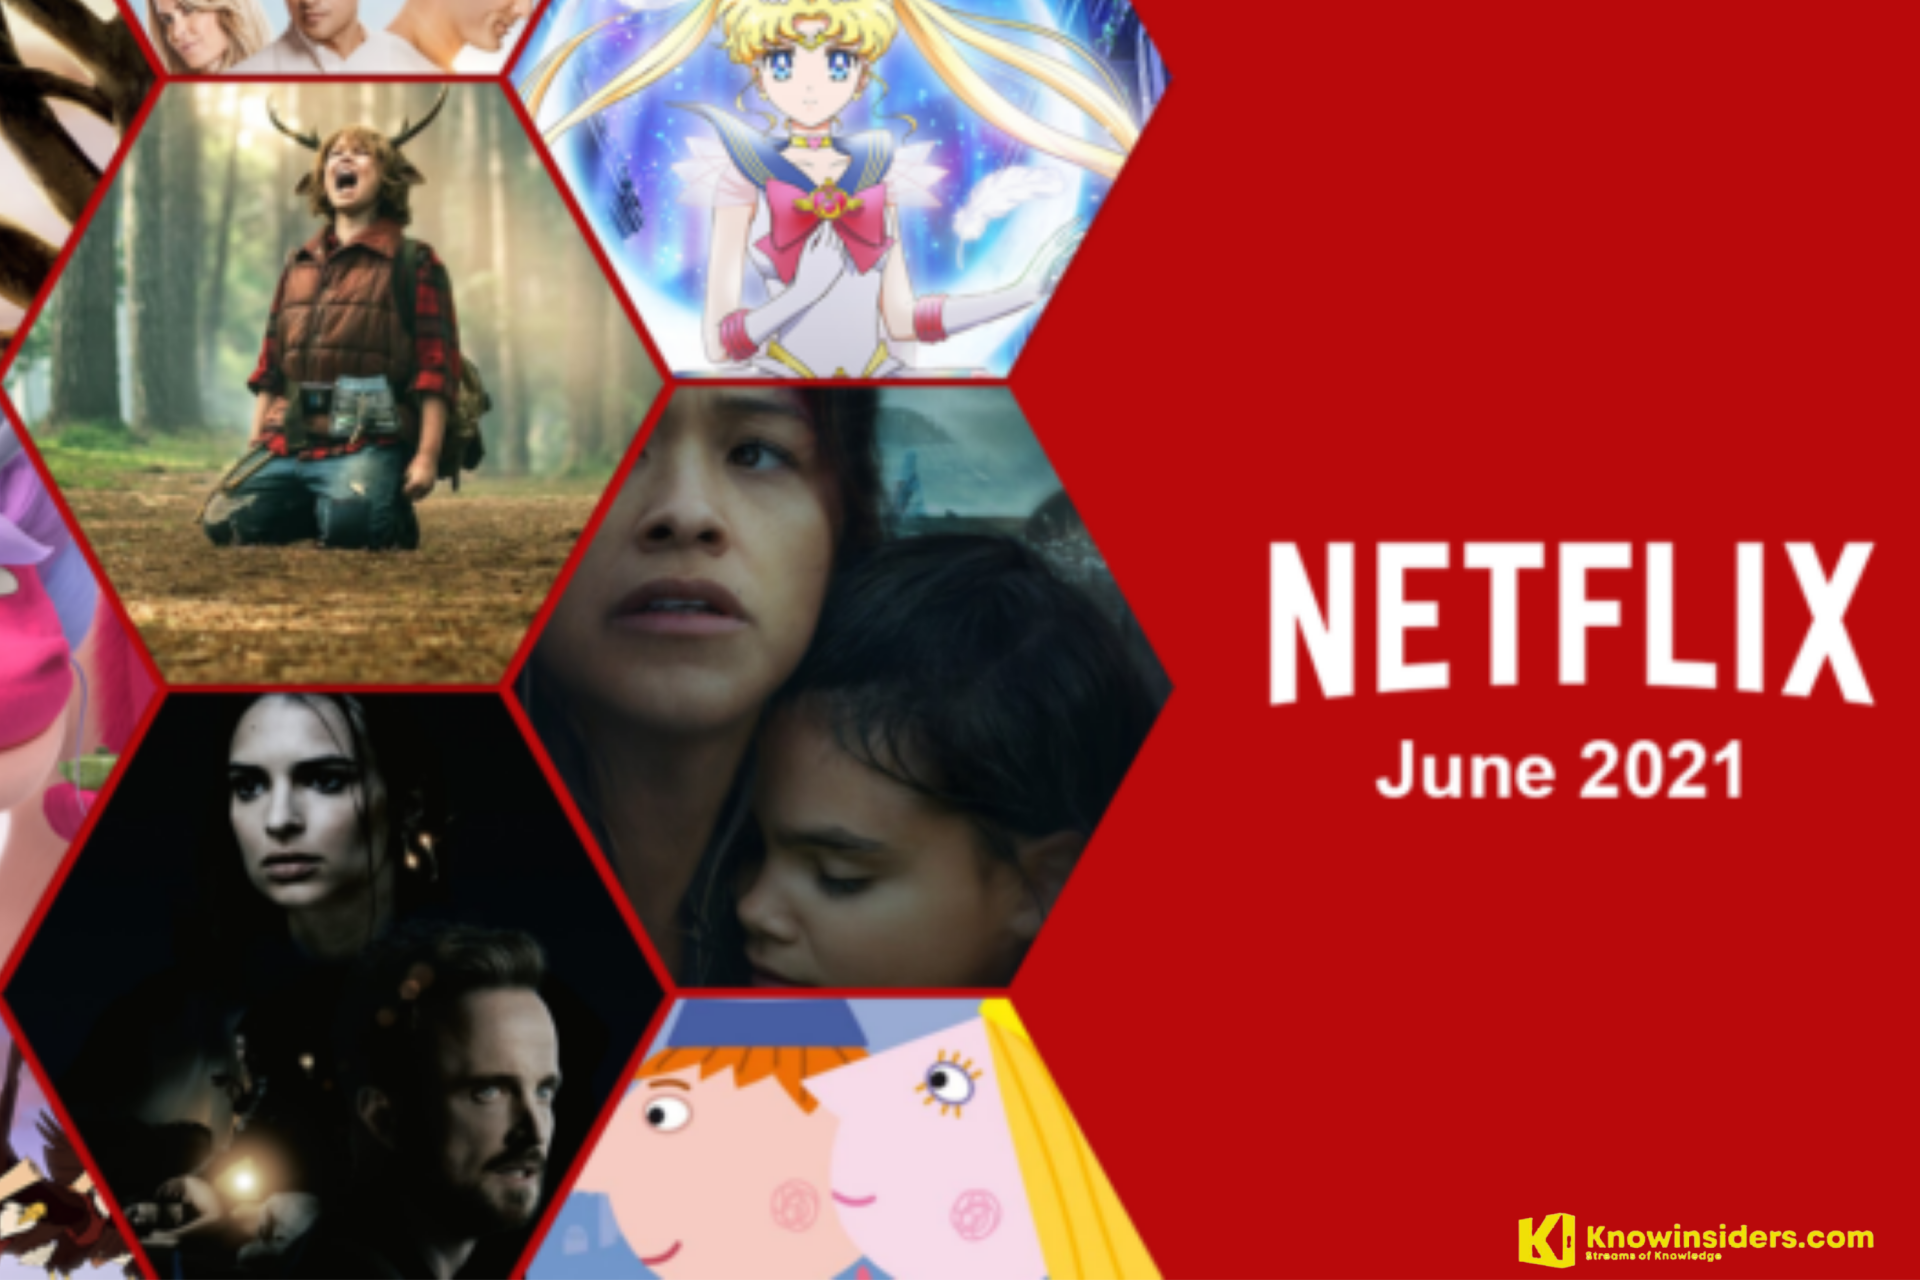 First Look at What’s Coming to Netflix in June 2021